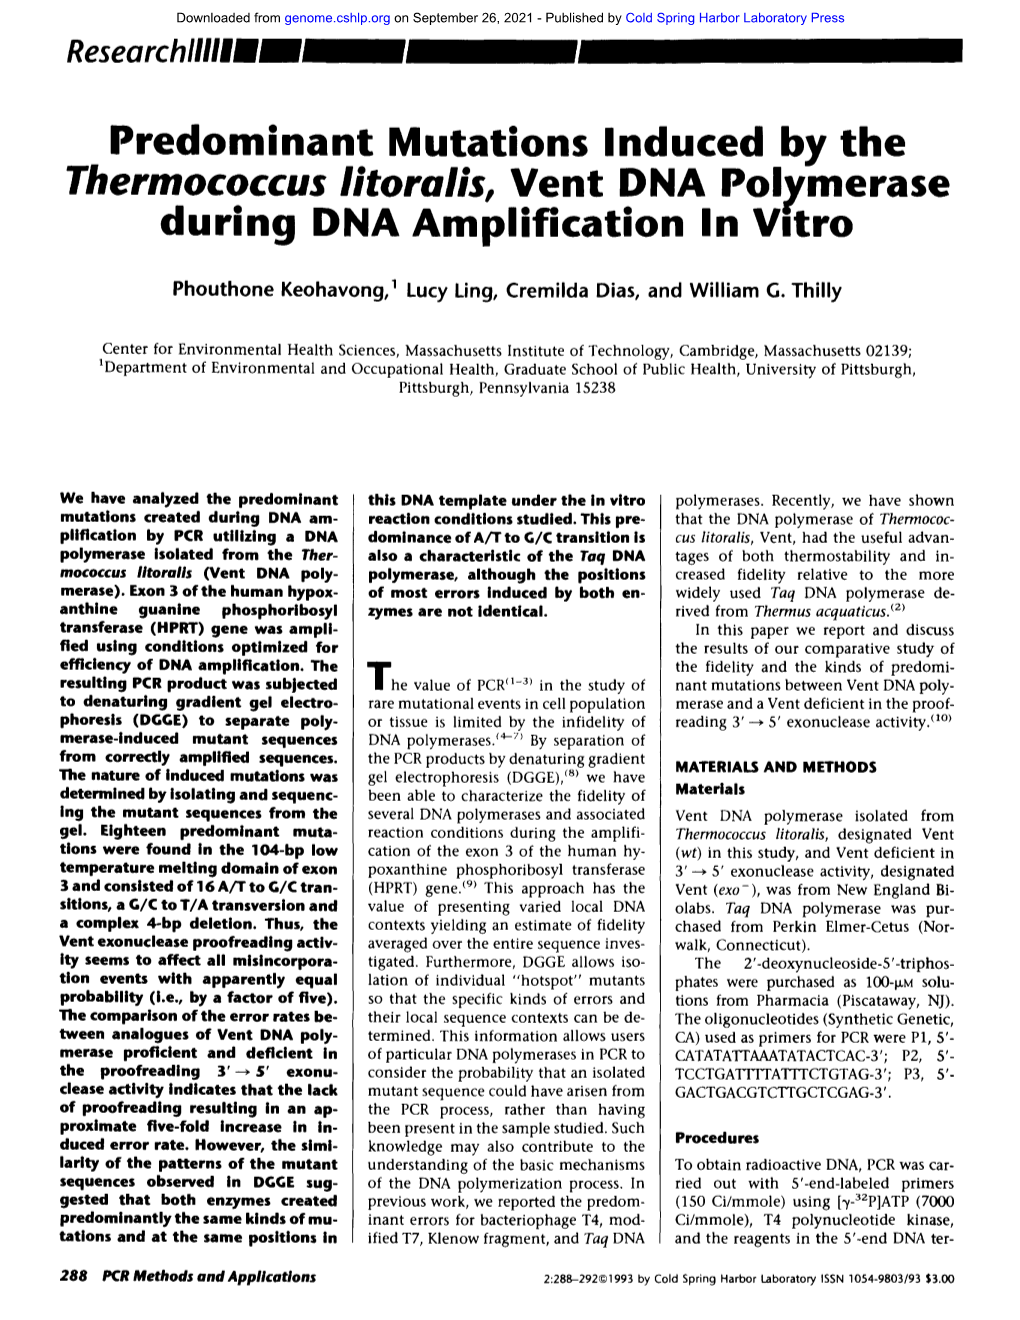 Thermococcus Litorali$, Vent DNA Polymerase During DNA Amplification in Vitro